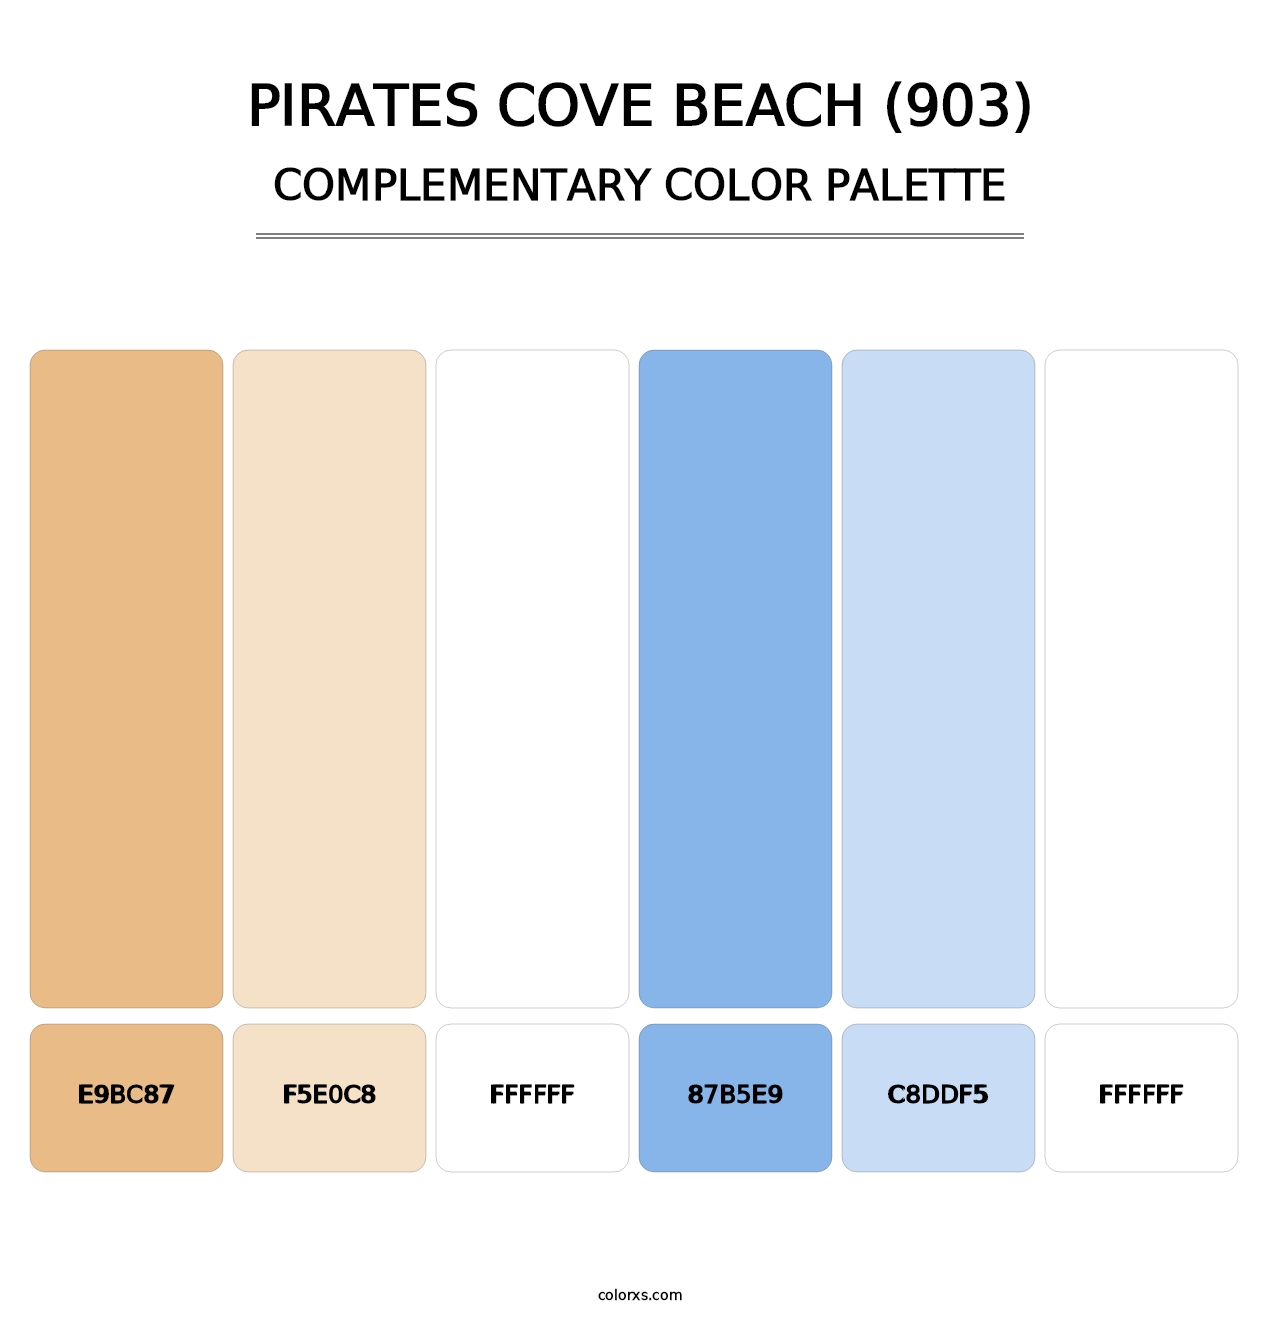 Pirates Cove Beach (903) - Complementary Color Palette